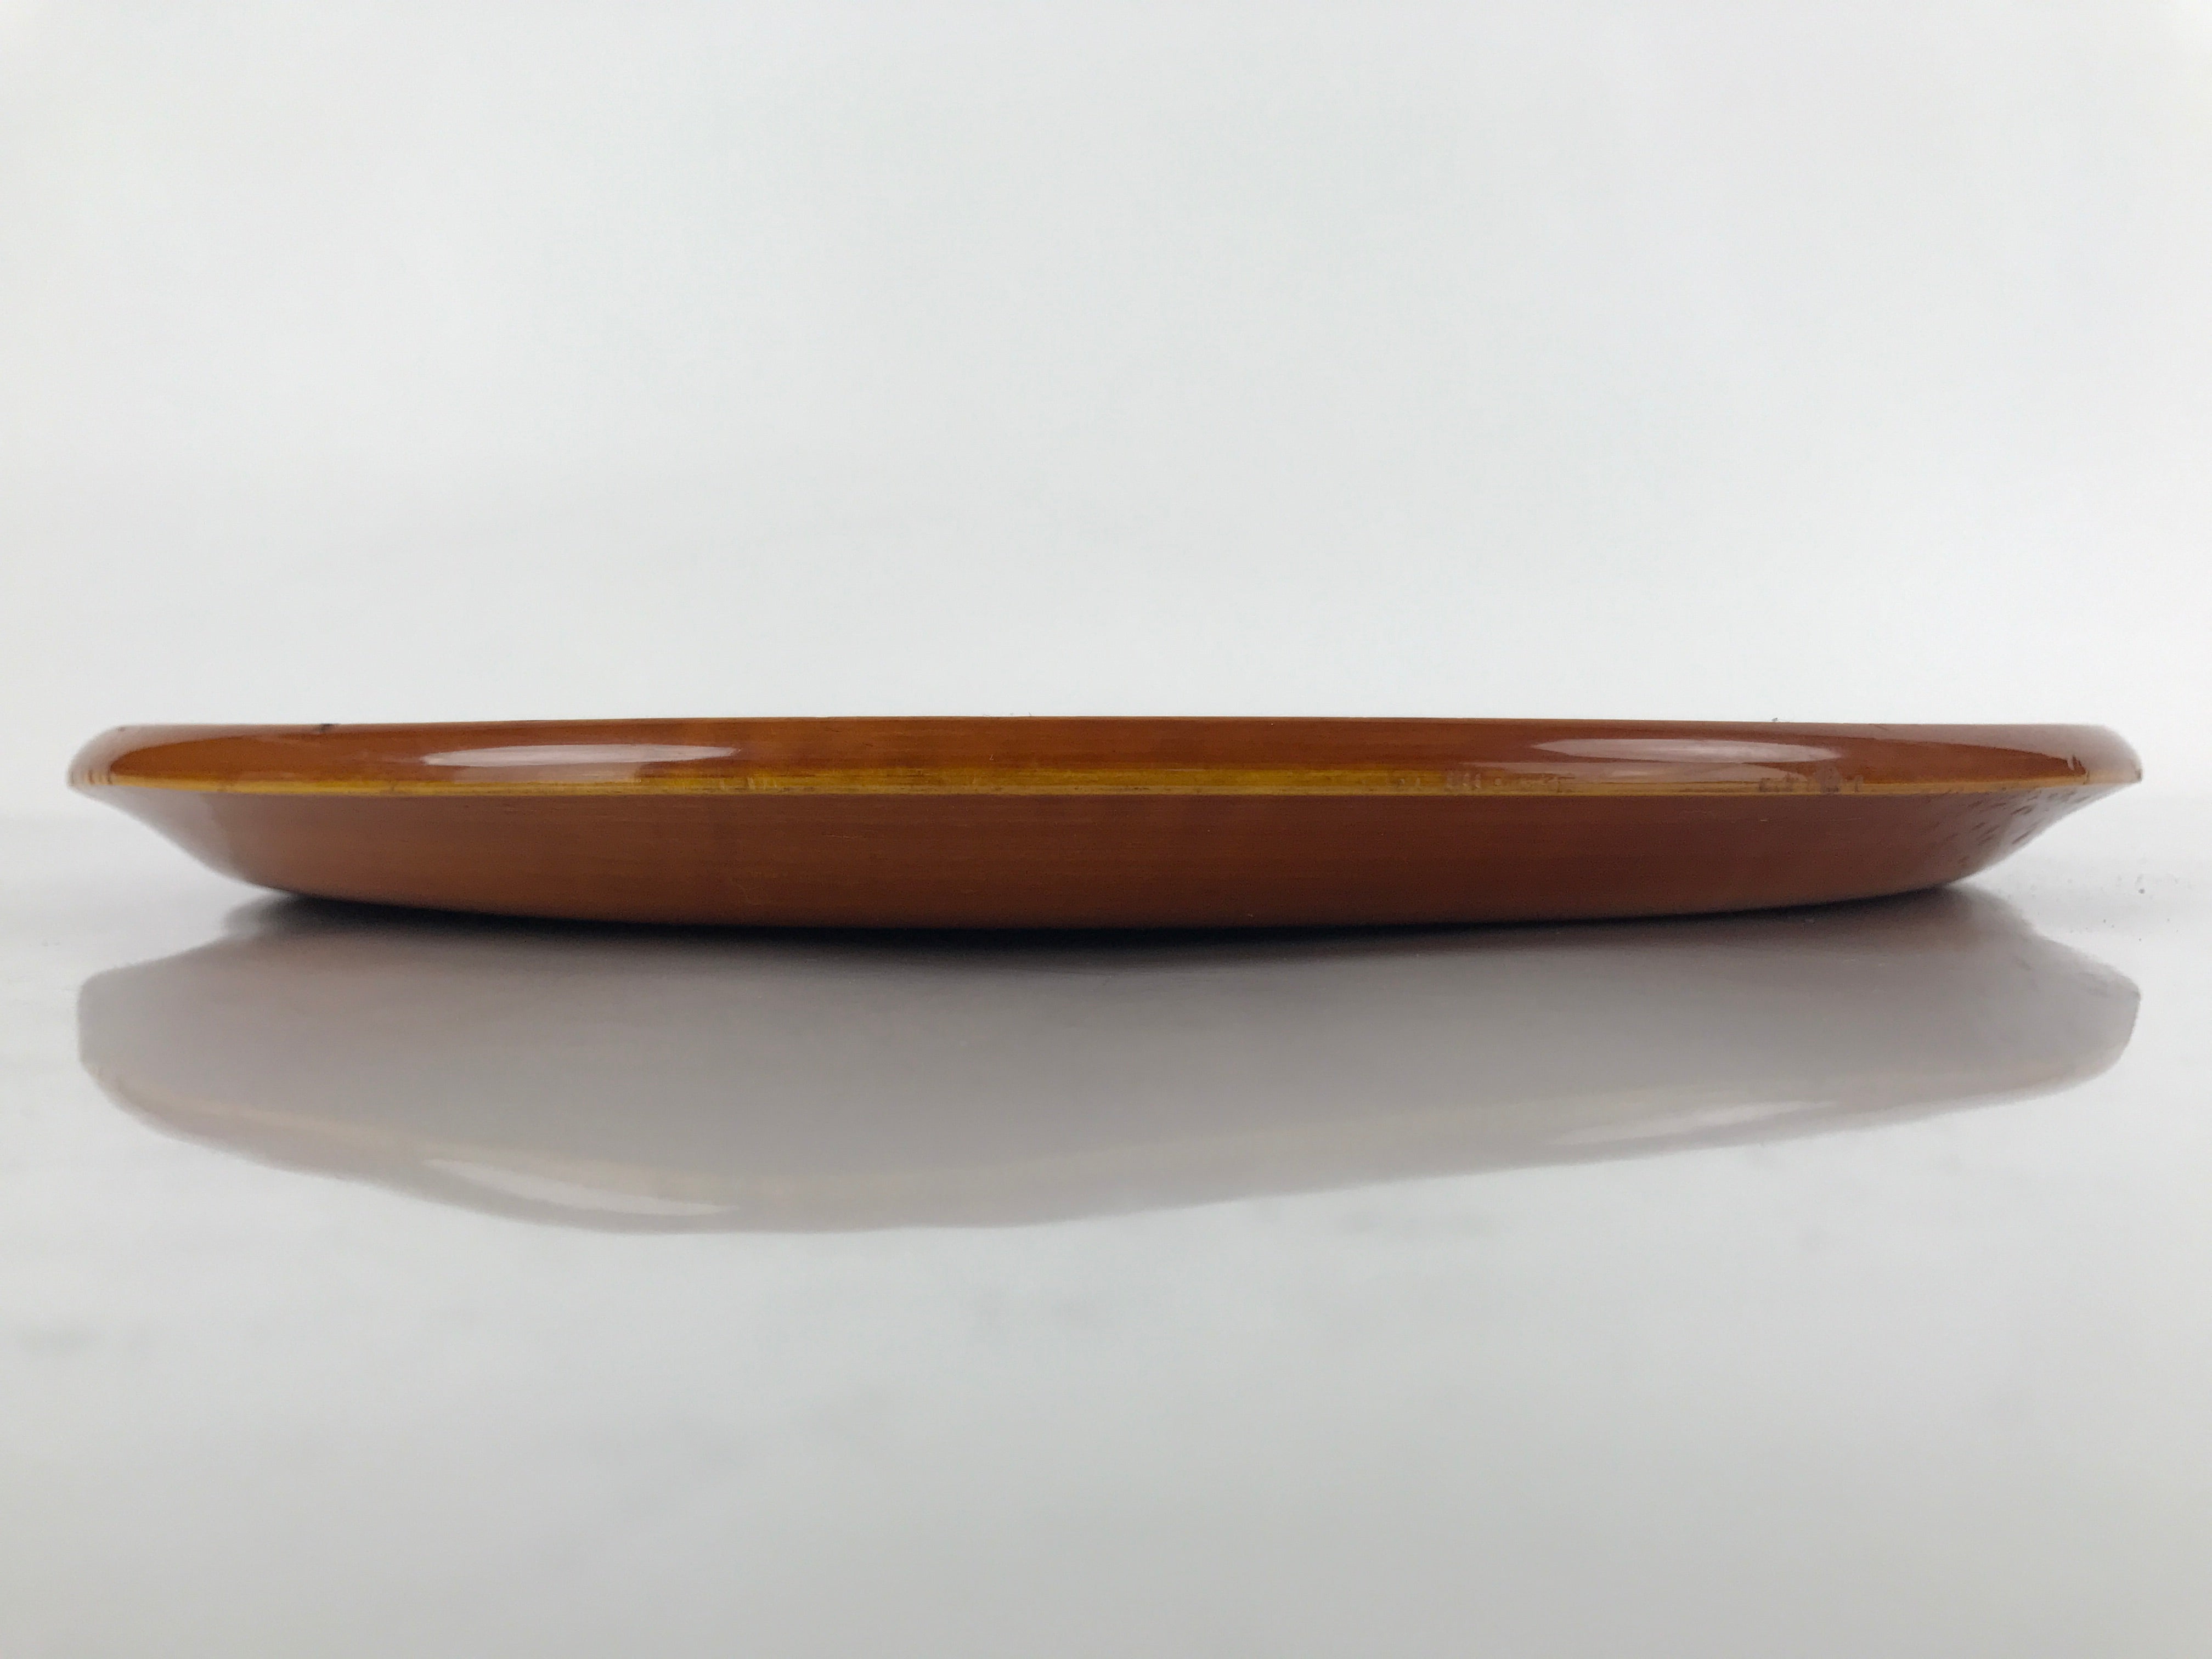 Japanese Lacquered Wooden Serving Tray Vtg Round Obon Hida Shunkei Brown L142